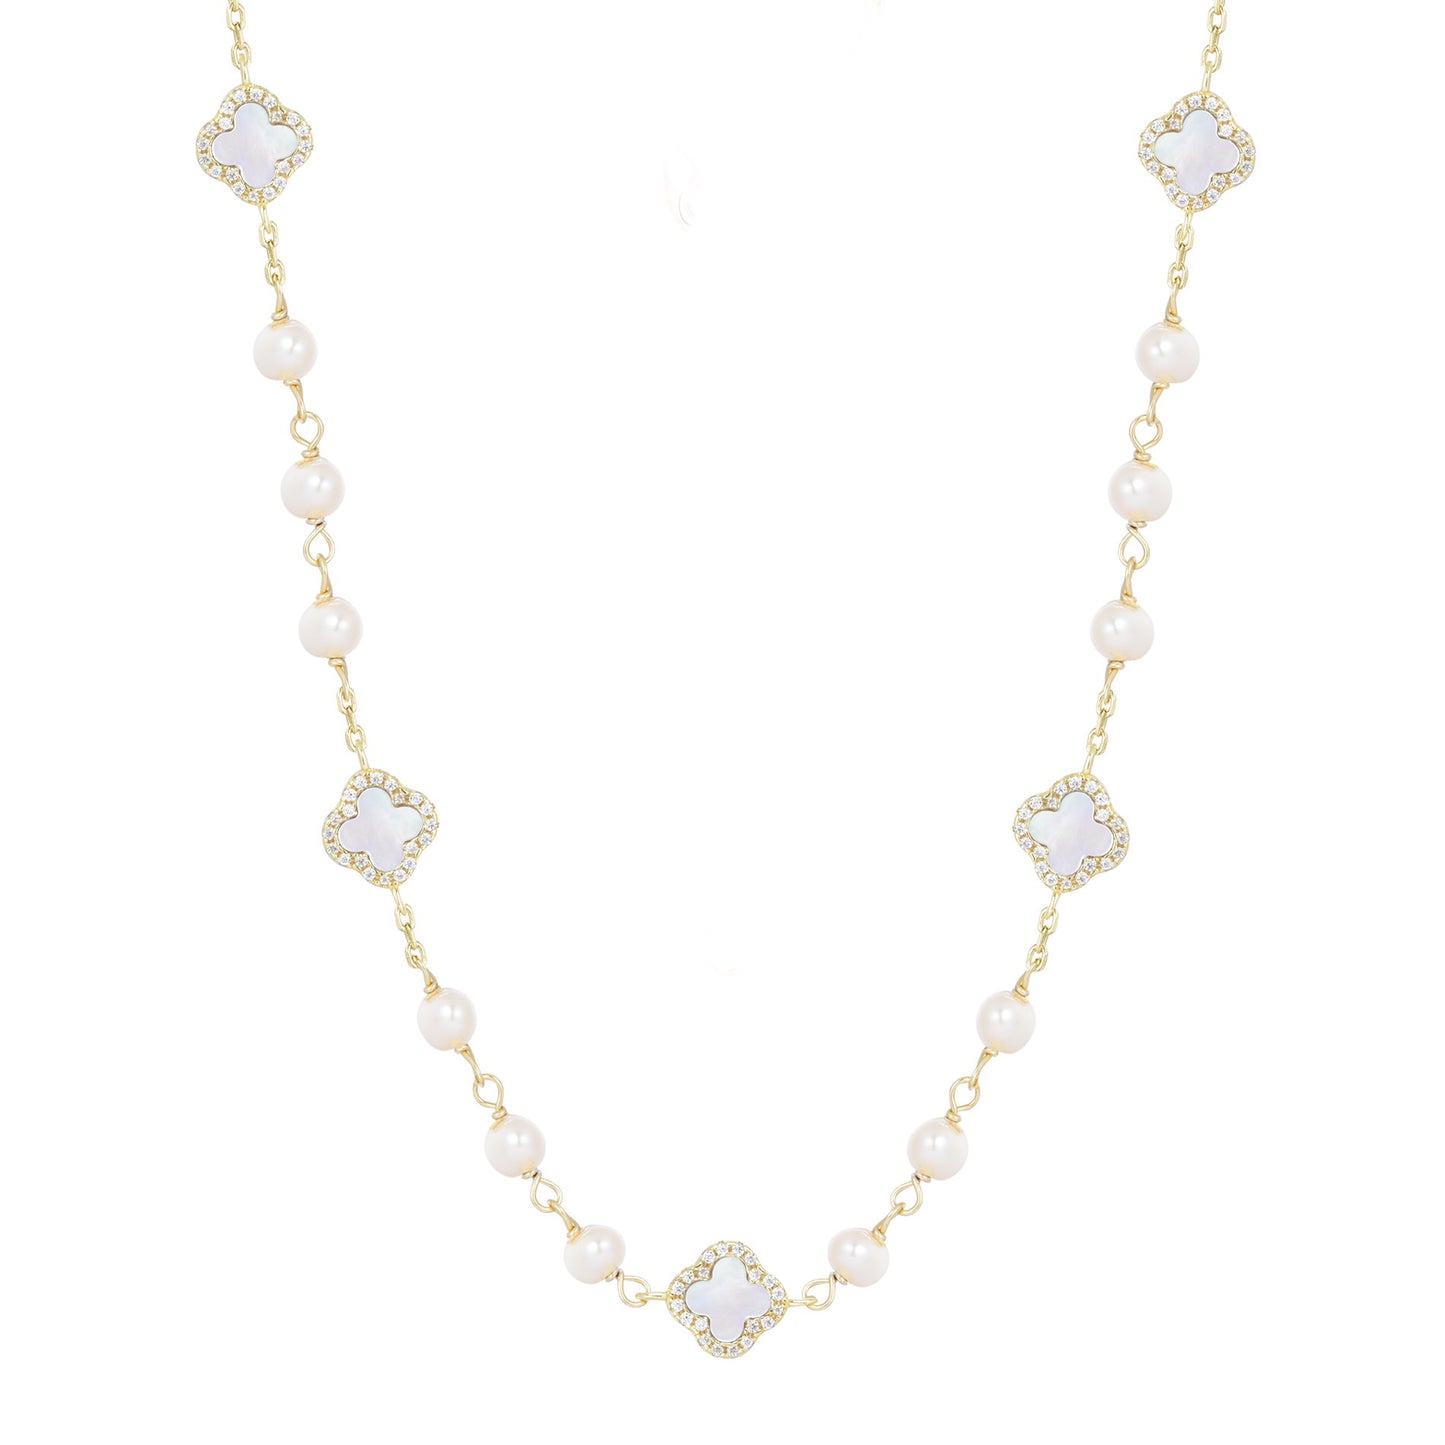 KIARA PEARL MINI MOTHER OF PEARL FIVE CLOVER GOLD NECKLACE